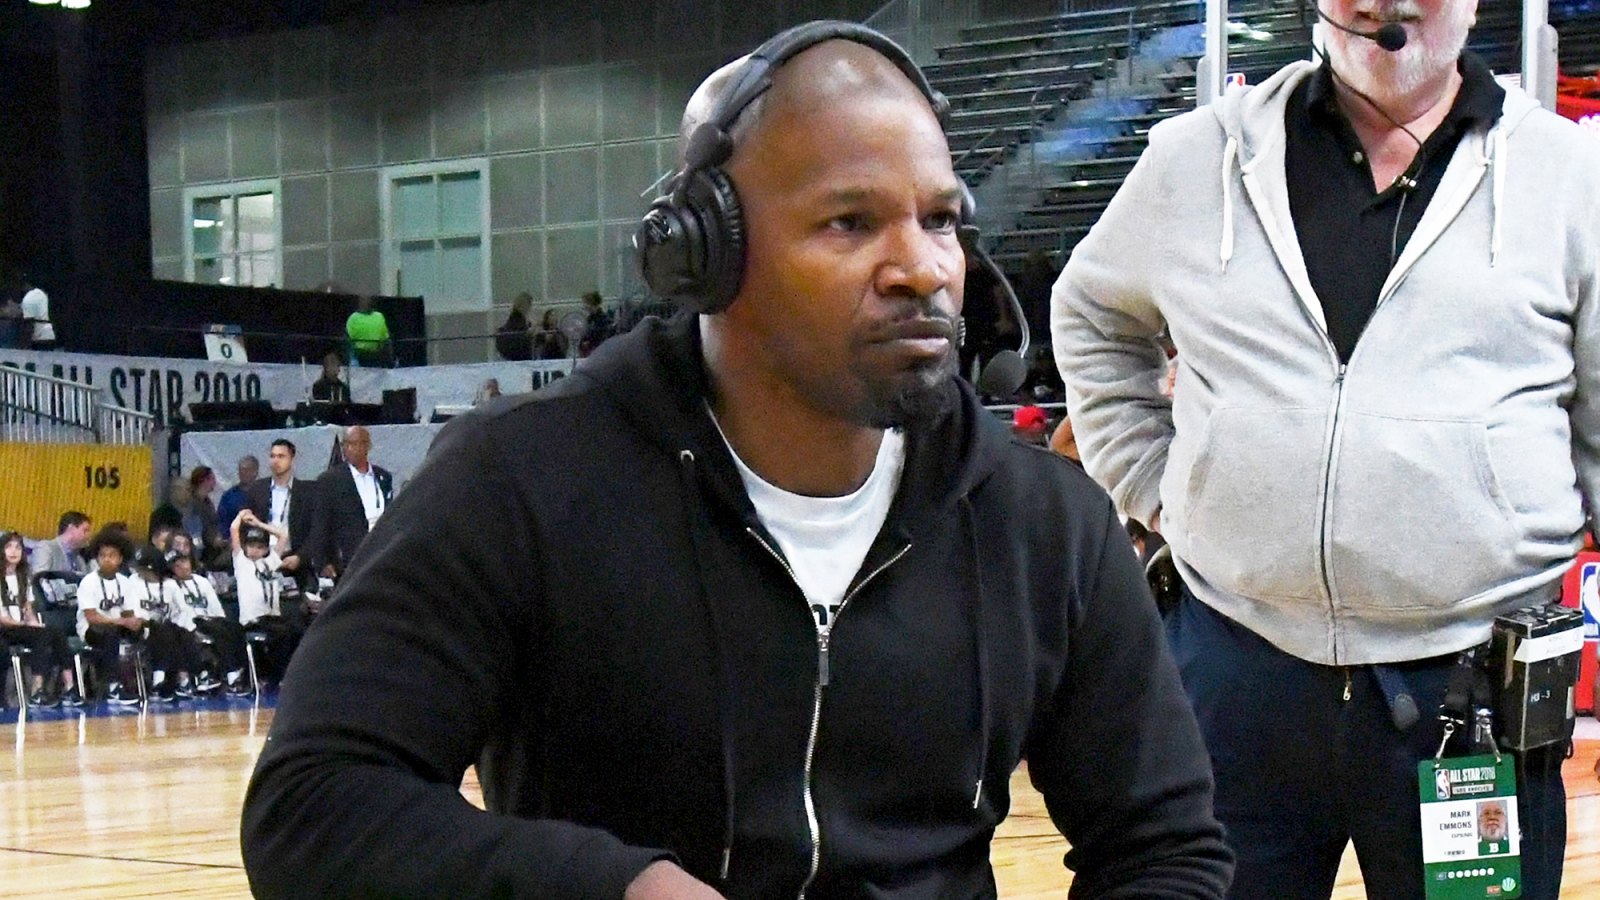 Jamie Foxx during the 2018 NBA All-Star Game Celebrity Game at Los Angeles Convention Center on February 16, 2018 in Los Angeles, California.